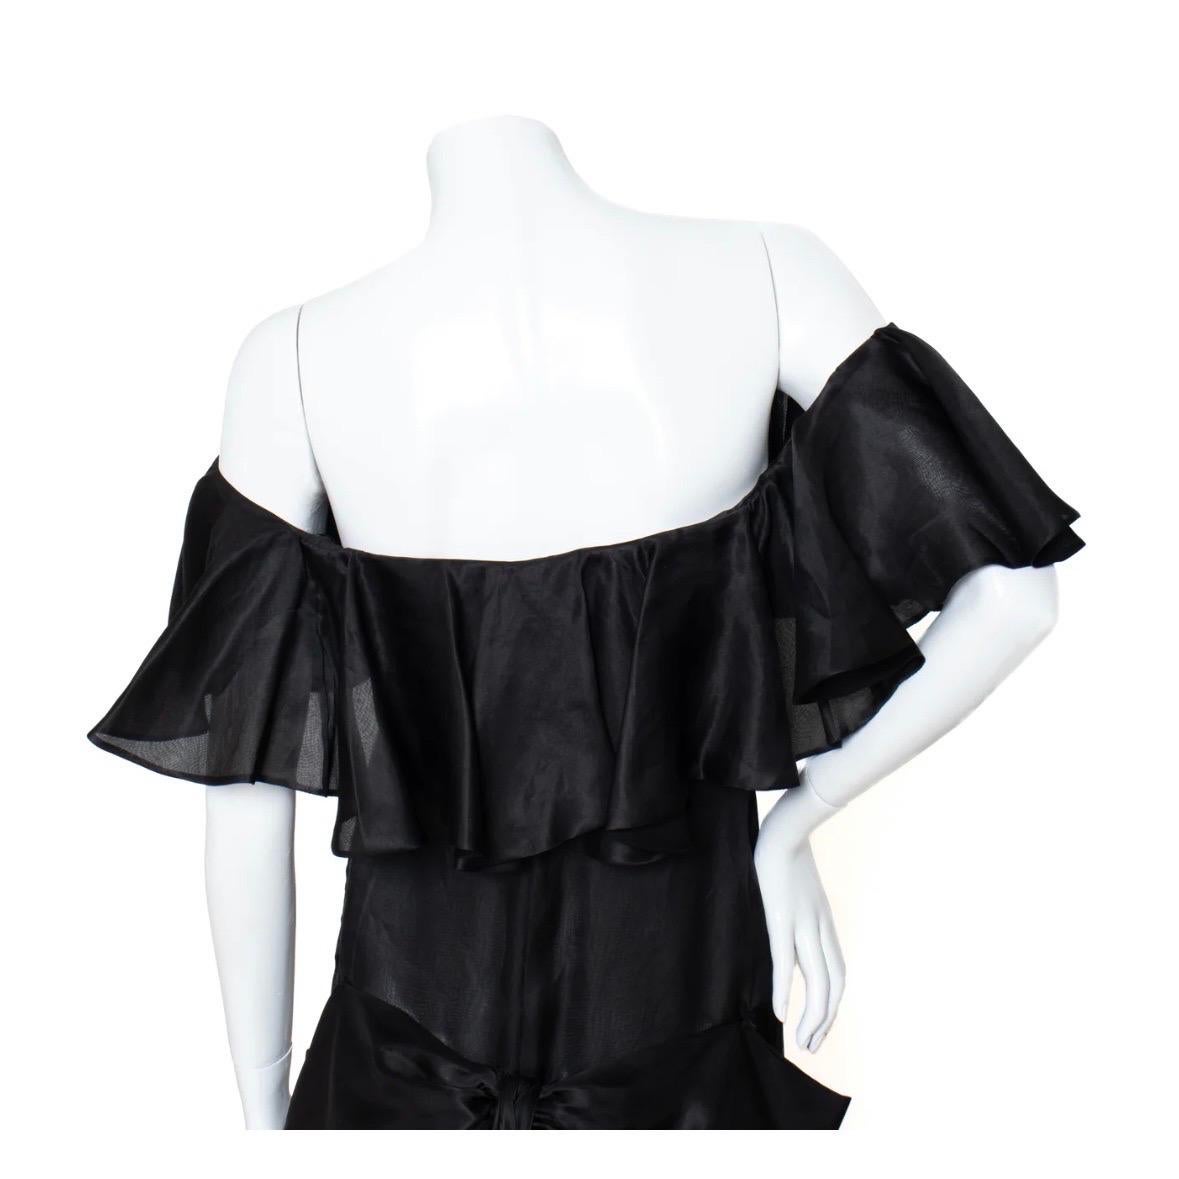 Yves Saint Laurent Haute Couture Ruffled Gown (1980s) For Sale 2